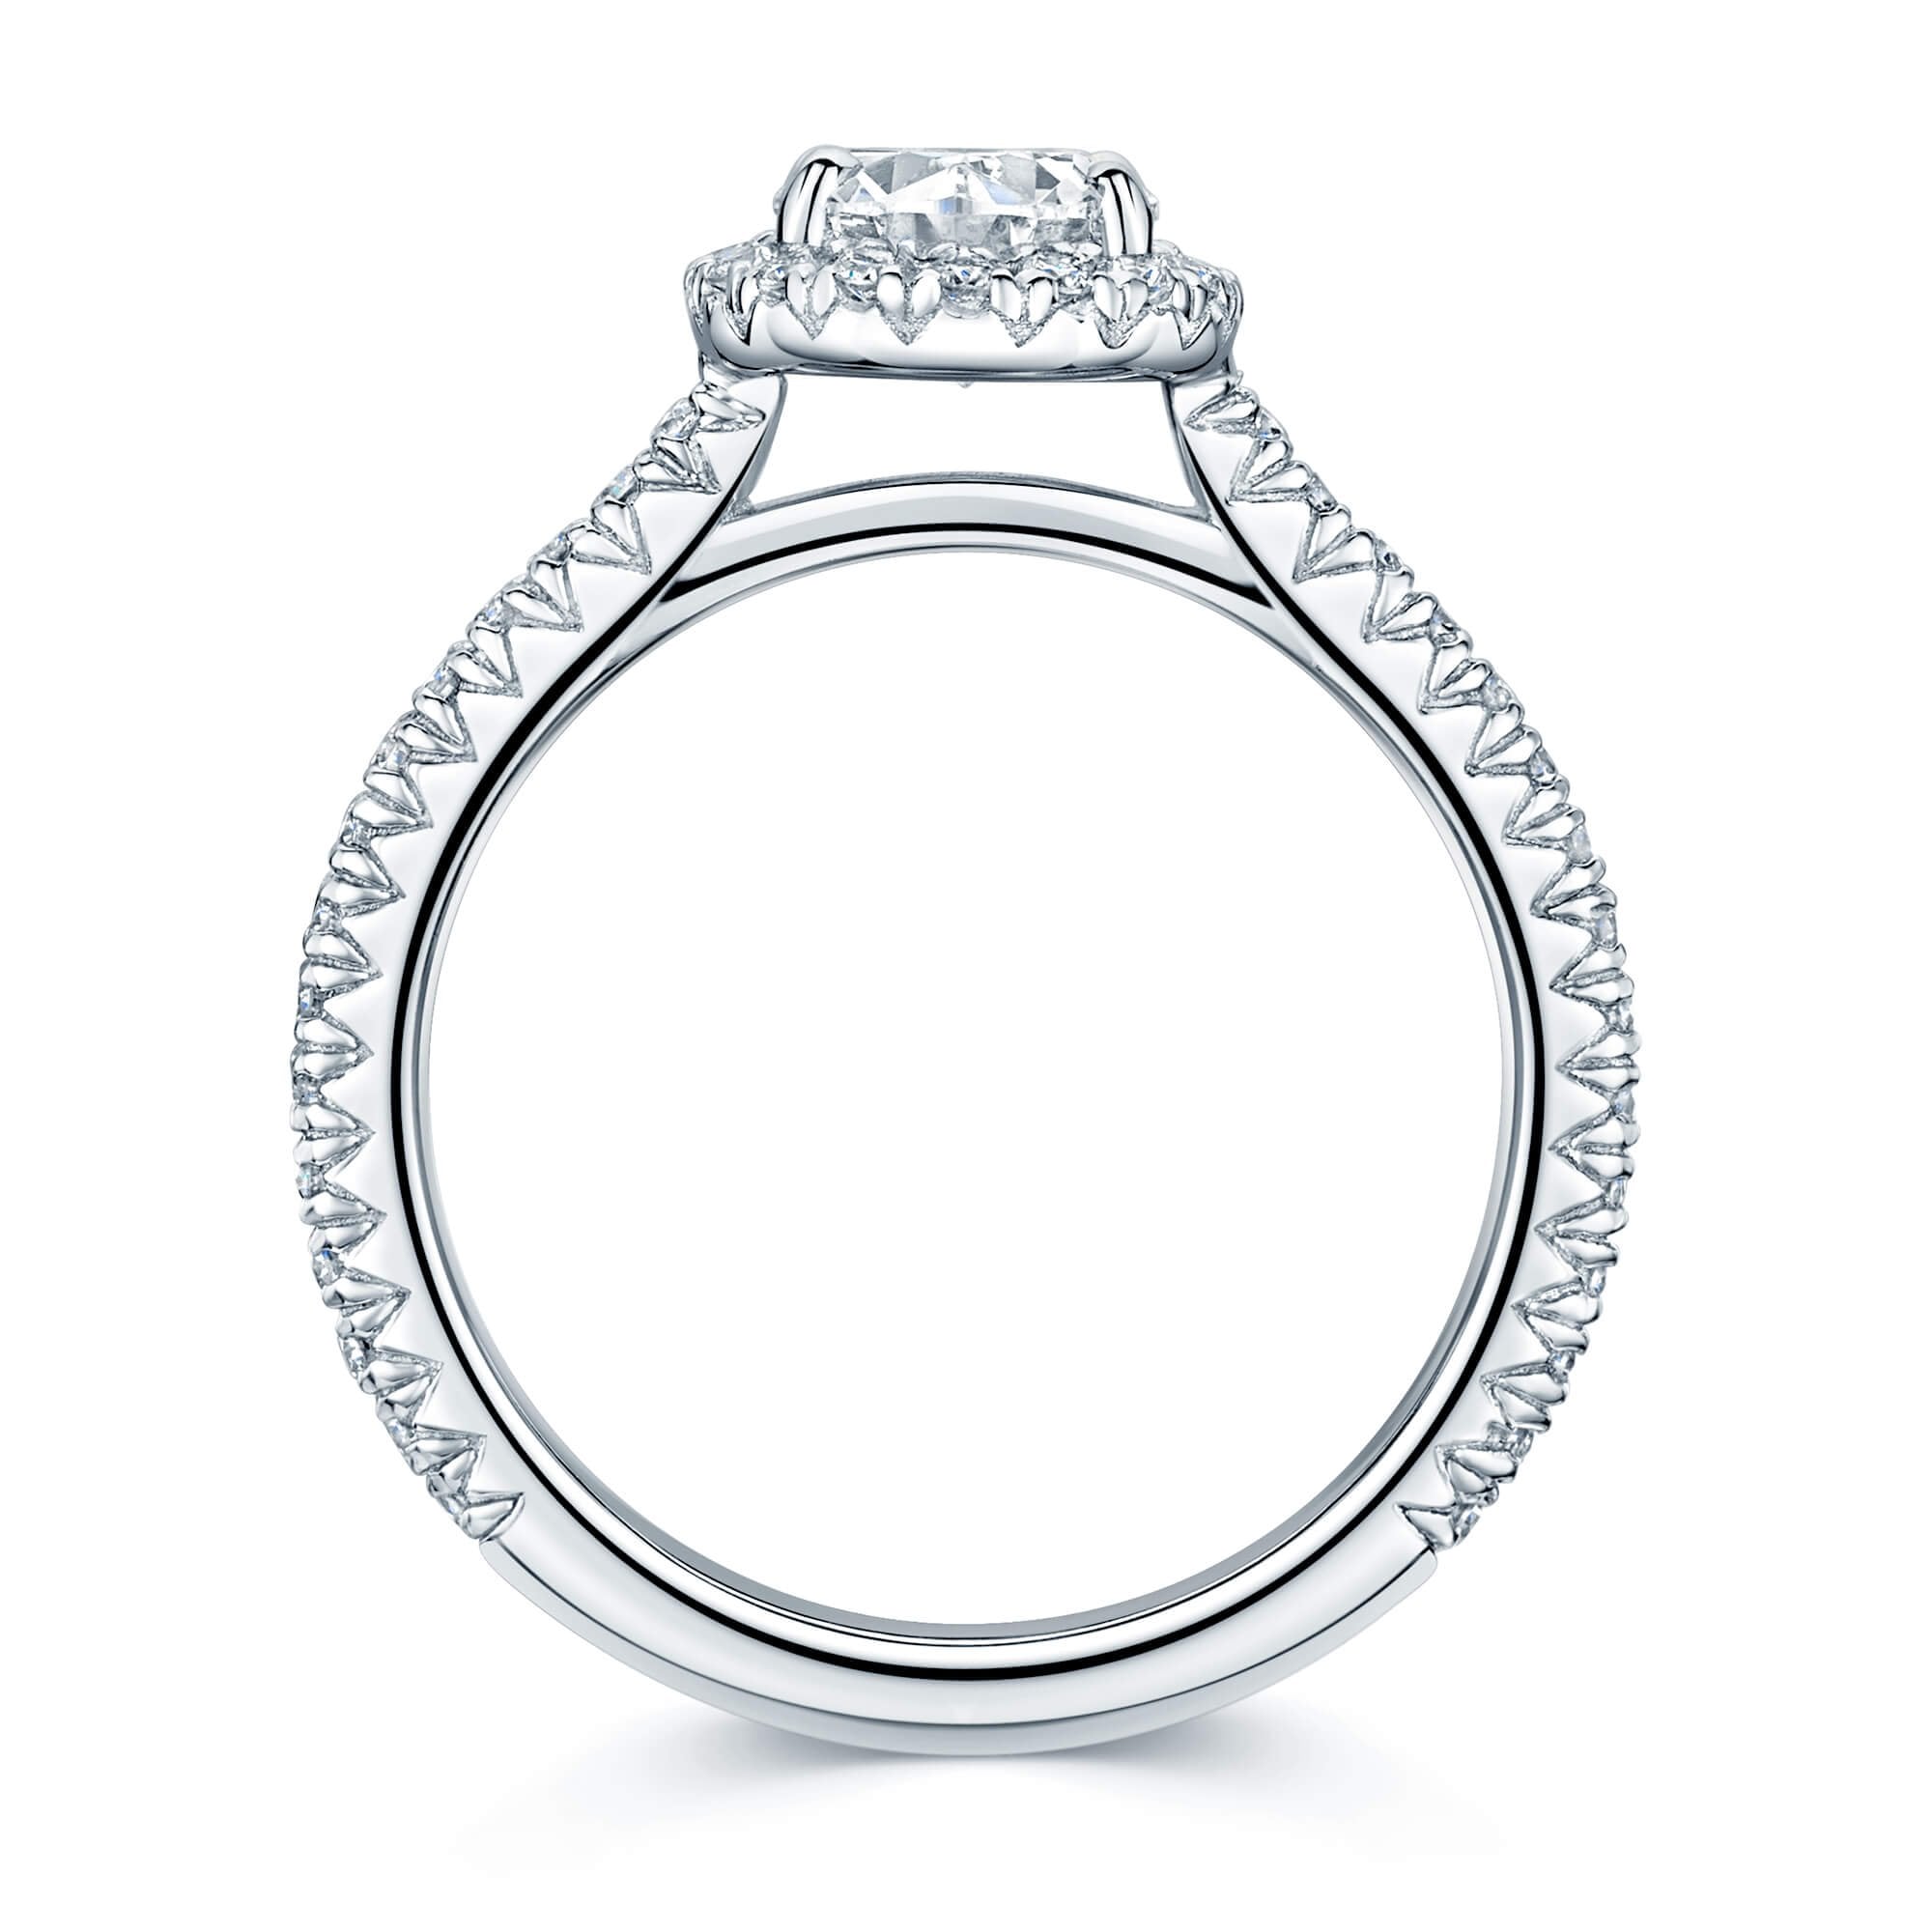 Platinum GIA Certificated Oval Diamond Halo Ring With Diamond Set Shoulders